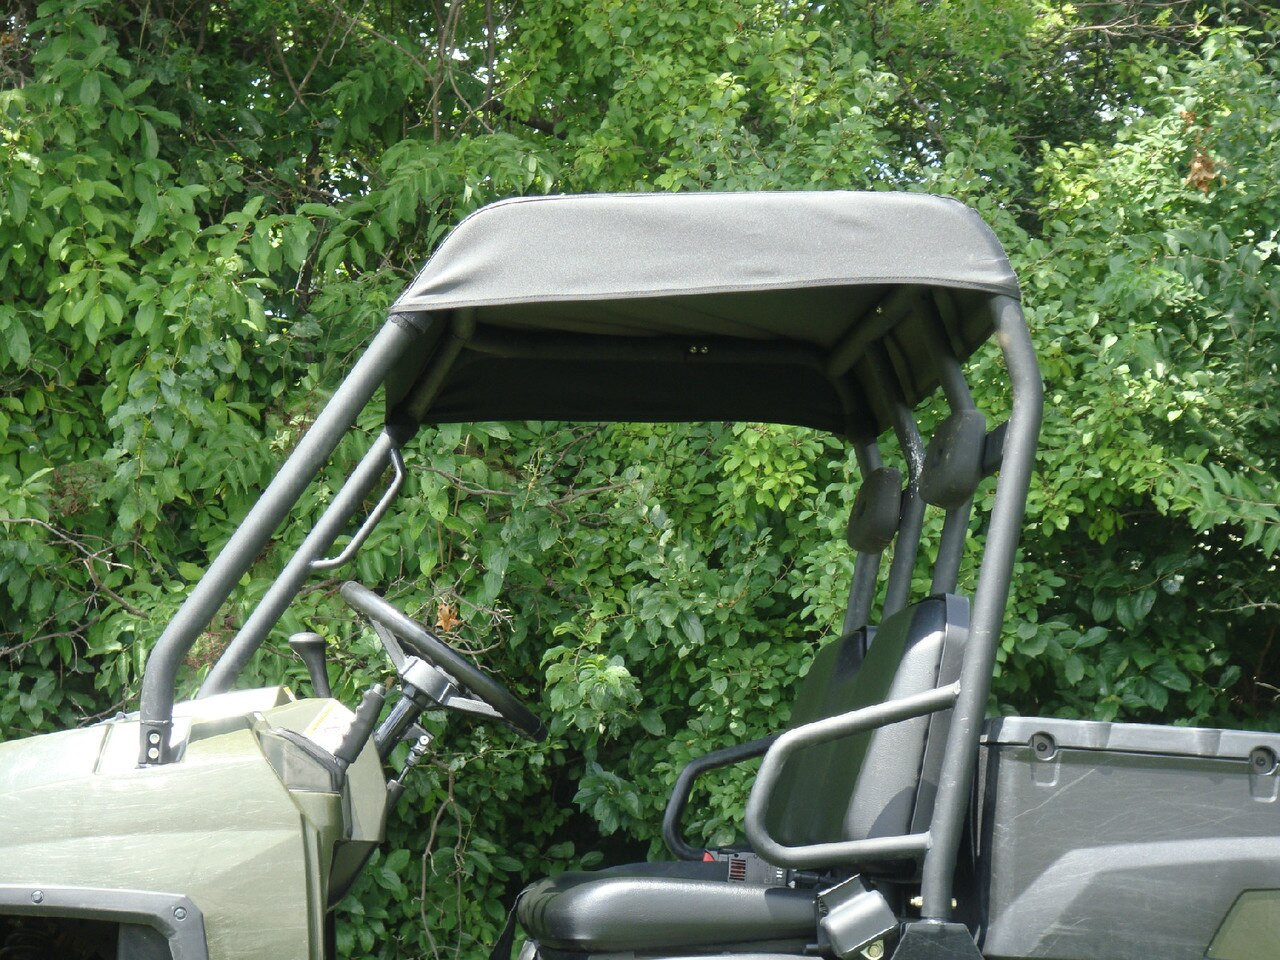 3 Star side x side Polaris Ranger Full-Size 570 Soft top side view